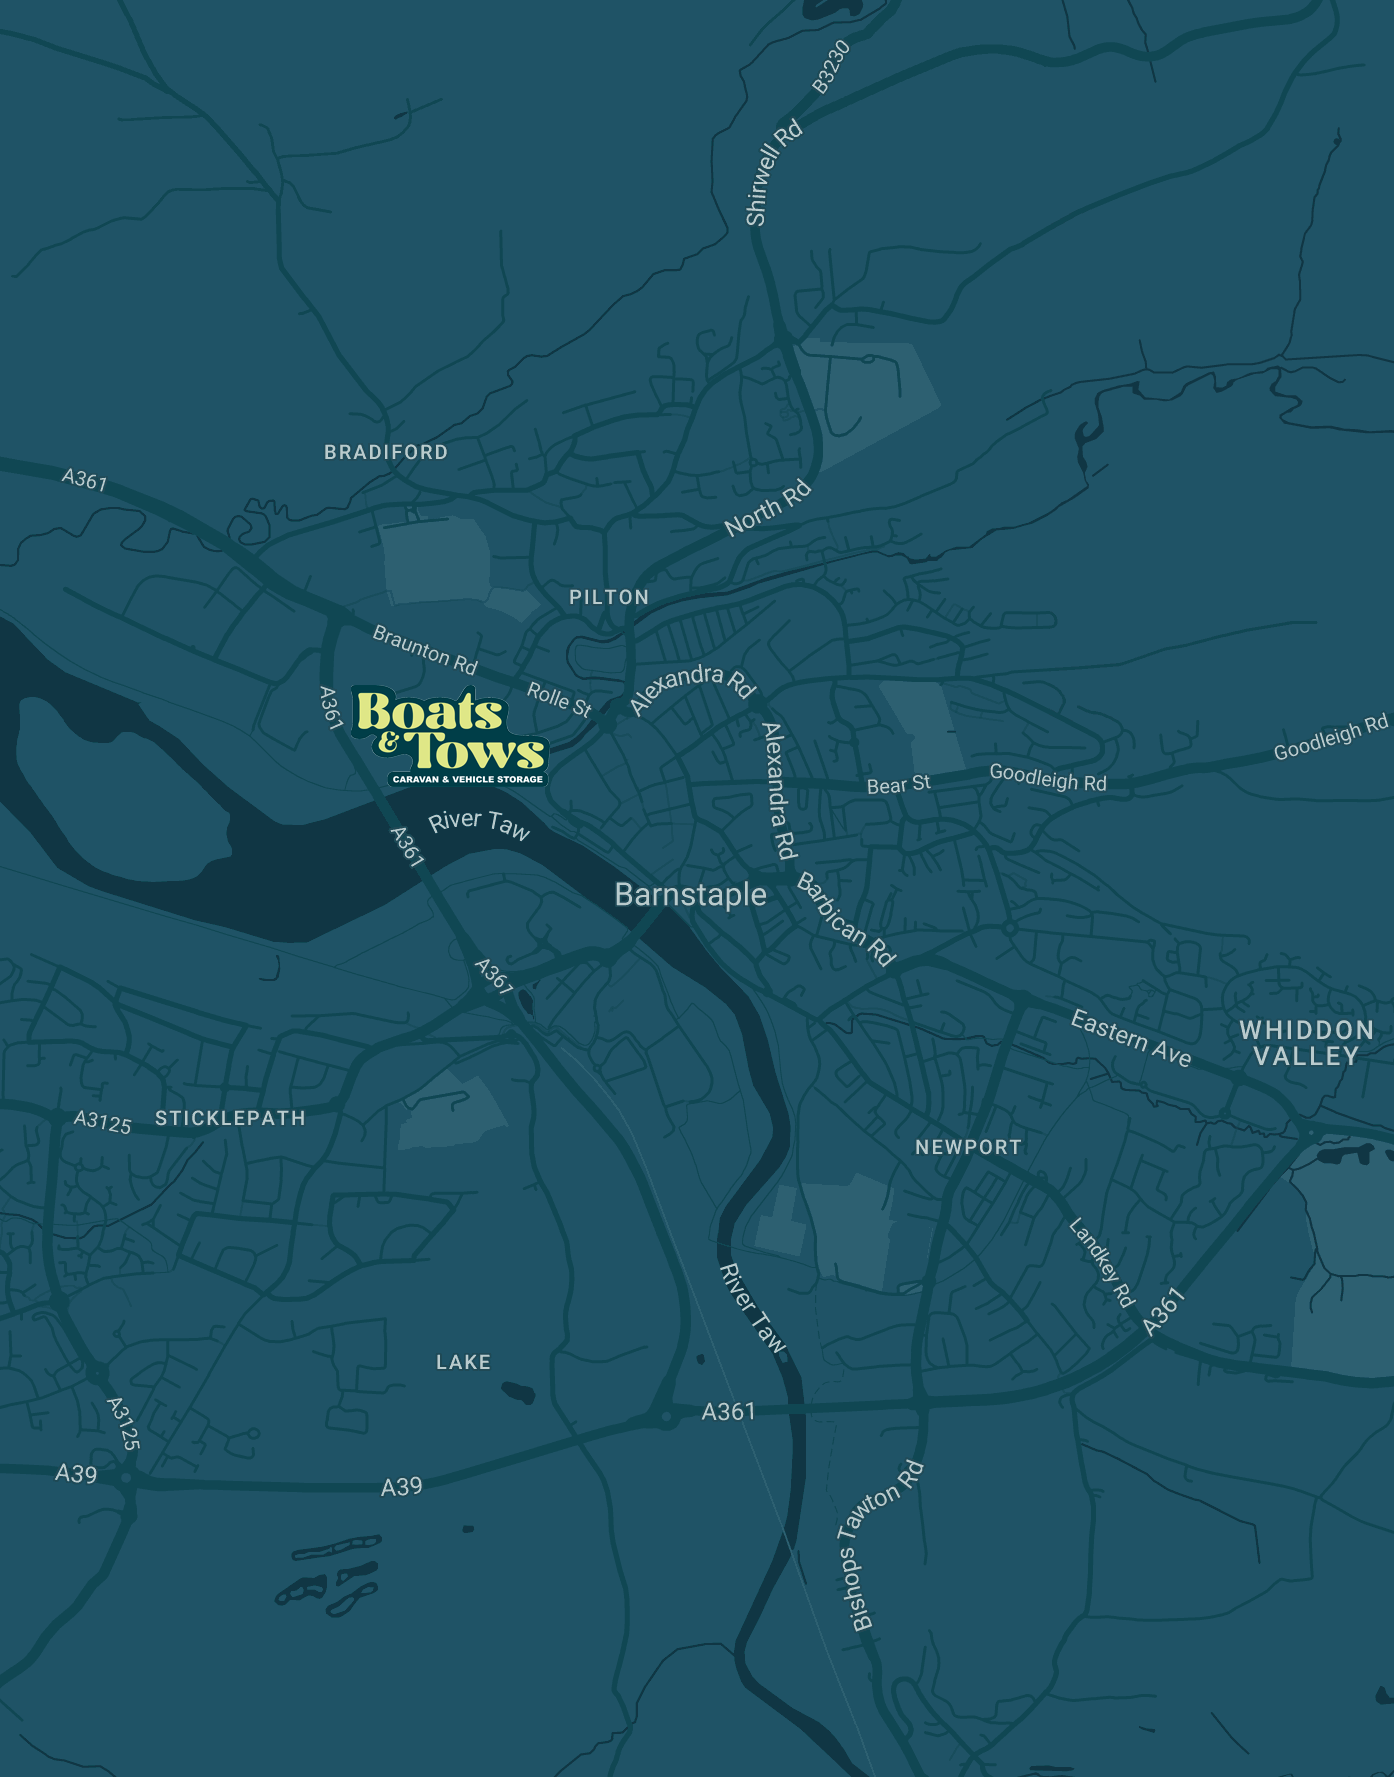 A map of Barnstaple and surrounding areas in North Devon with Boats and Tows storage facility highlighted.